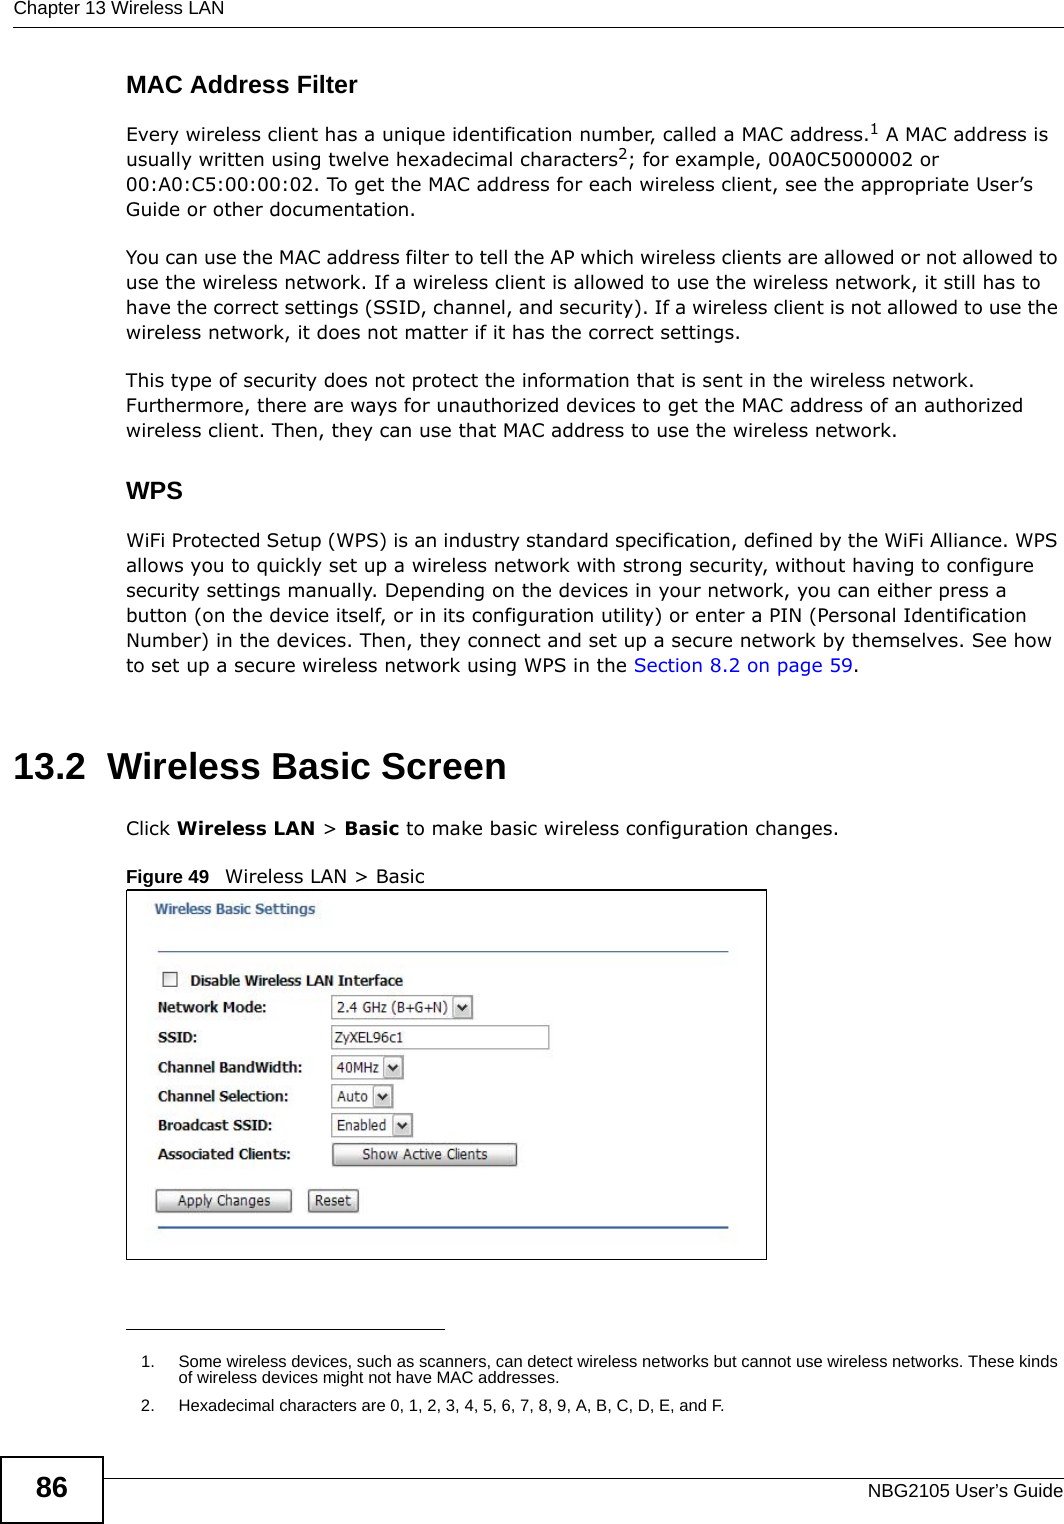 Chapter 13 Wireless LANNBG2105 User’s Guide86MAC Address FilterEvery wireless client has a unique identification number, called a MAC address.1 A MAC address is usually written using twelve hexadecimal characters2; for example, 00A0C5000002 or 00:A0:C5:00:00:02. To get the MAC address for each wireless client, see the appropriate User’s Guide or other documentation.You can use the MAC address filter to tell the AP which wireless clients are allowed or not allowed to use the wireless network. If a wireless client is allowed to use the wireless network, it still has to have the correct settings (SSID, channel, and security). If a wireless client is not allowed to use the wireless network, it does not matter if it has the correct settings.This type of security does not protect the information that is sent in the wireless network. Furthermore, there are ways for unauthorized devices to get the MAC address of an authorized wireless client. Then, they can use that MAC address to use the wireless network.WPSWiFi Protected Setup (WPS) is an industry standard specification, defined by the WiFi Alliance. WPS allows you to quickly set up a wireless network with strong security, without having to configure security settings manually. Depending on the devices in your network, you can either press a button (on the device itself, or in its configuration utility) or enter a PIN (Personal Identification Number) in the devices. Then, they connect and set up a secure network by themselves. See how to set up a secure wireless network using WPS in the Section 8.2 on page 59. 13.2  Wireless Basic ScreenClick Wireless LAN &gt; Basic to make basic wireless configuration changes.Figure 49   Wireless LAN &gt; Basic 1. Some wireless devices, such as scanners, can detect wireless networks but cannot use wireless networks. These kinds of wireless devices might not have MAC addresses.2. Hexadecimal characters are 0, 1, 2, 3, 4, 5, 6, 7, 8, 9, A, B, C, D, E, and F.